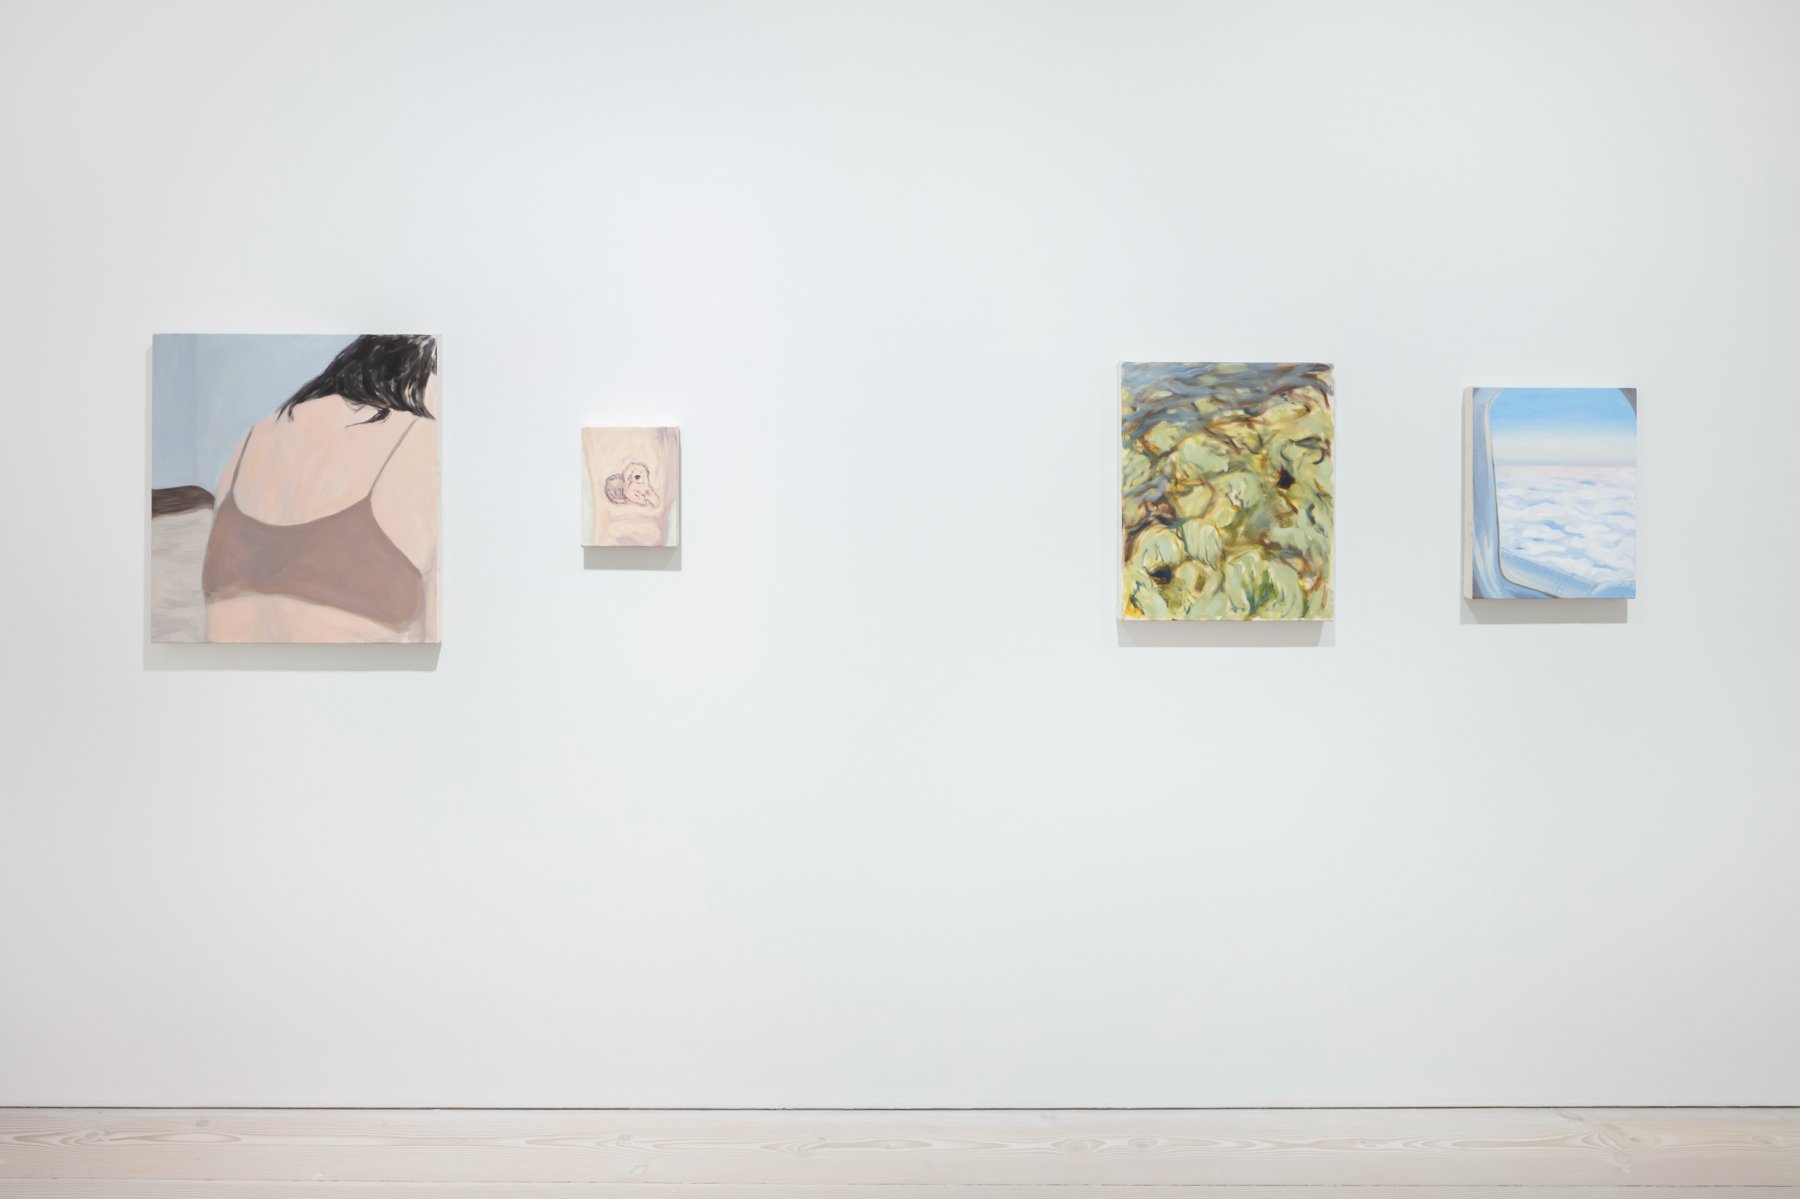 Installation image for Saimi Suikkanen: Let’s not think about tomorrow, at Galerie Forsblom